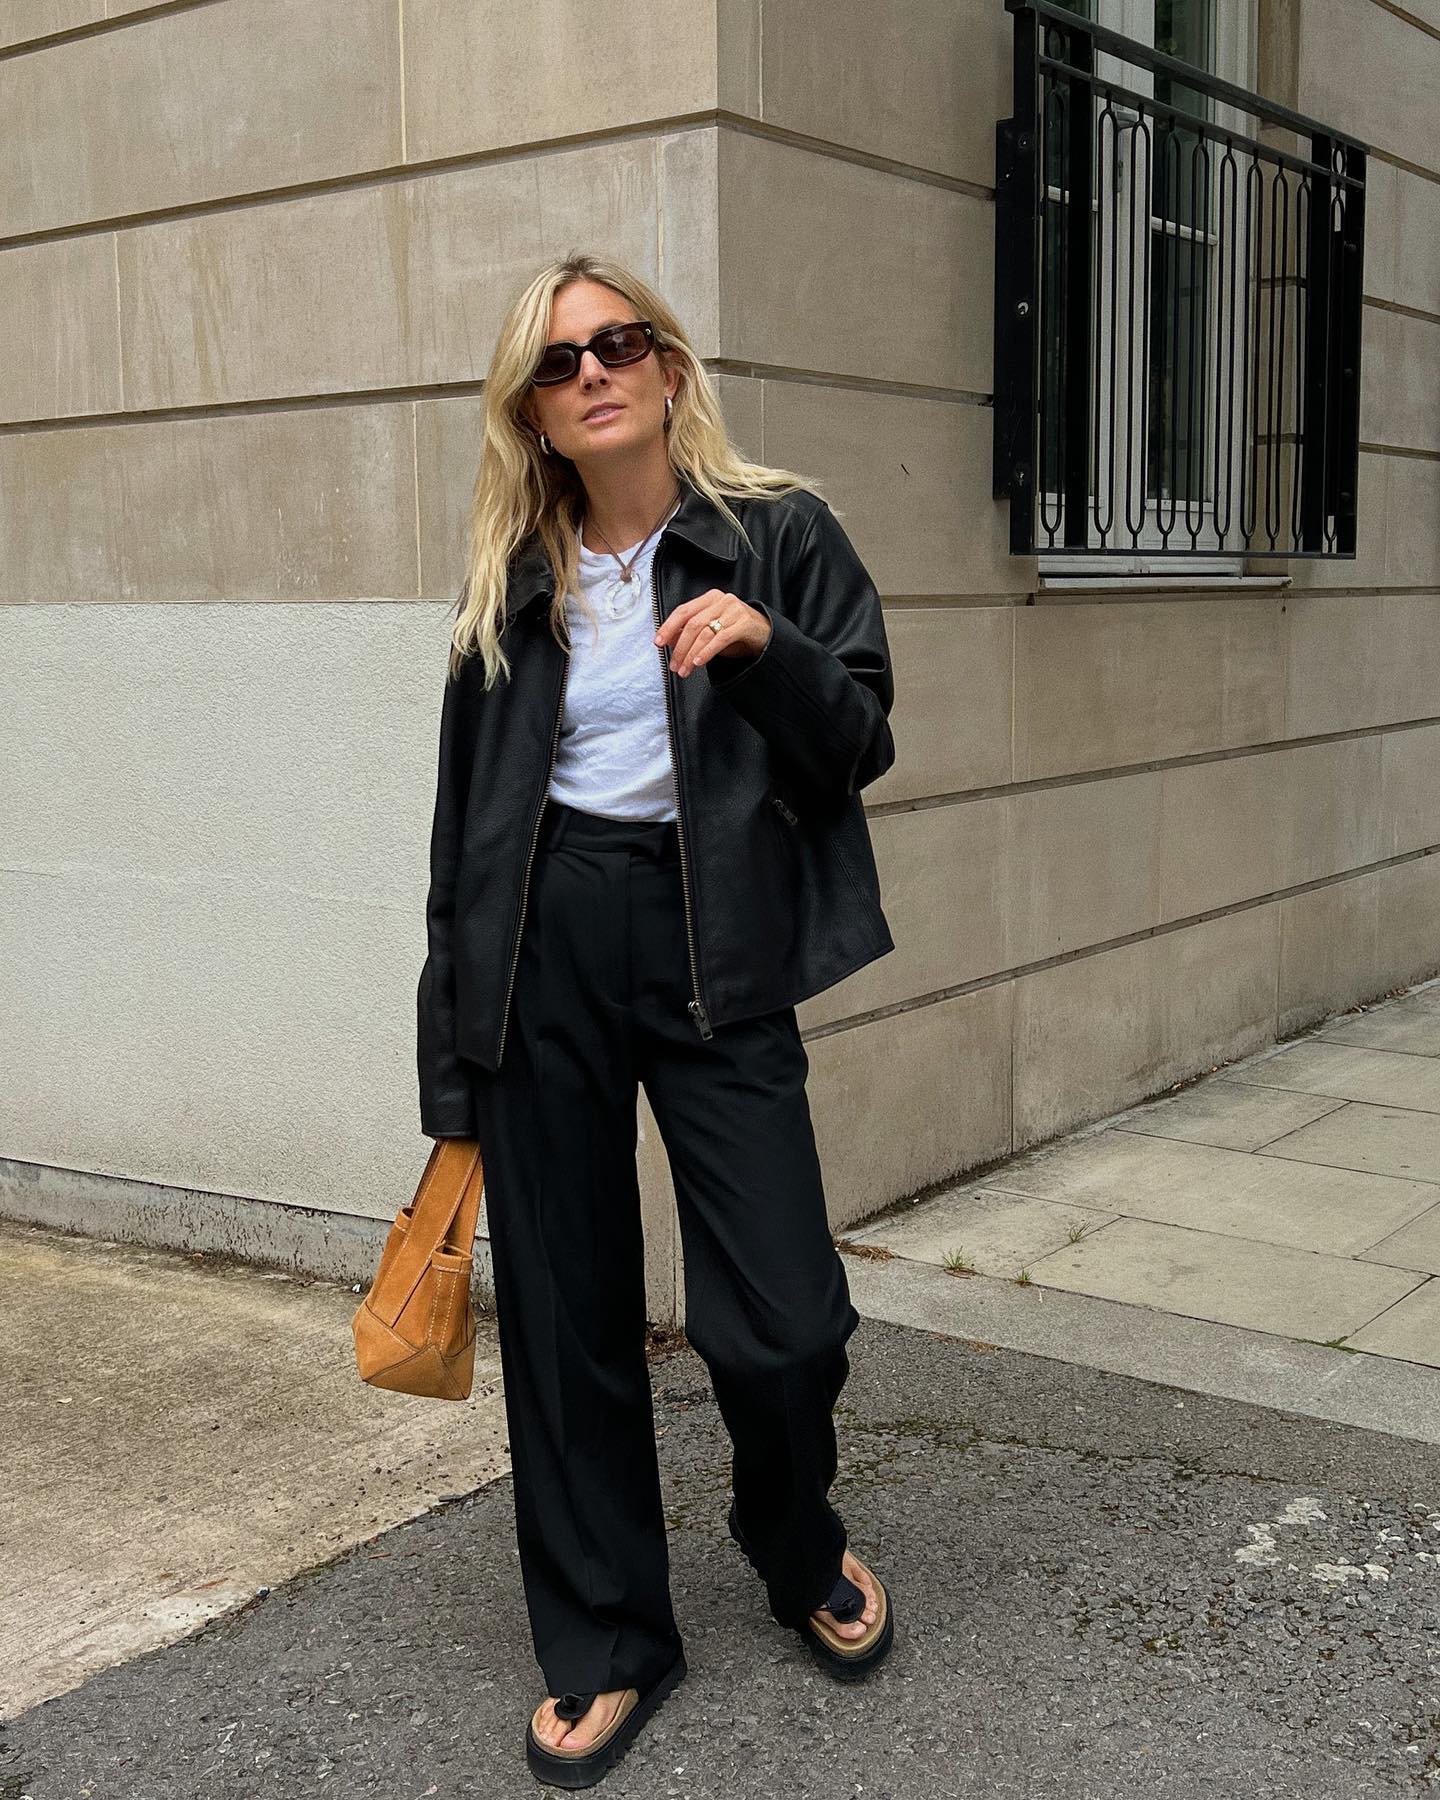 Influencer Lucy Williams 30 Fall Outfit Ideas Leather Bomber Jacket Black Trousers Platform Sandals